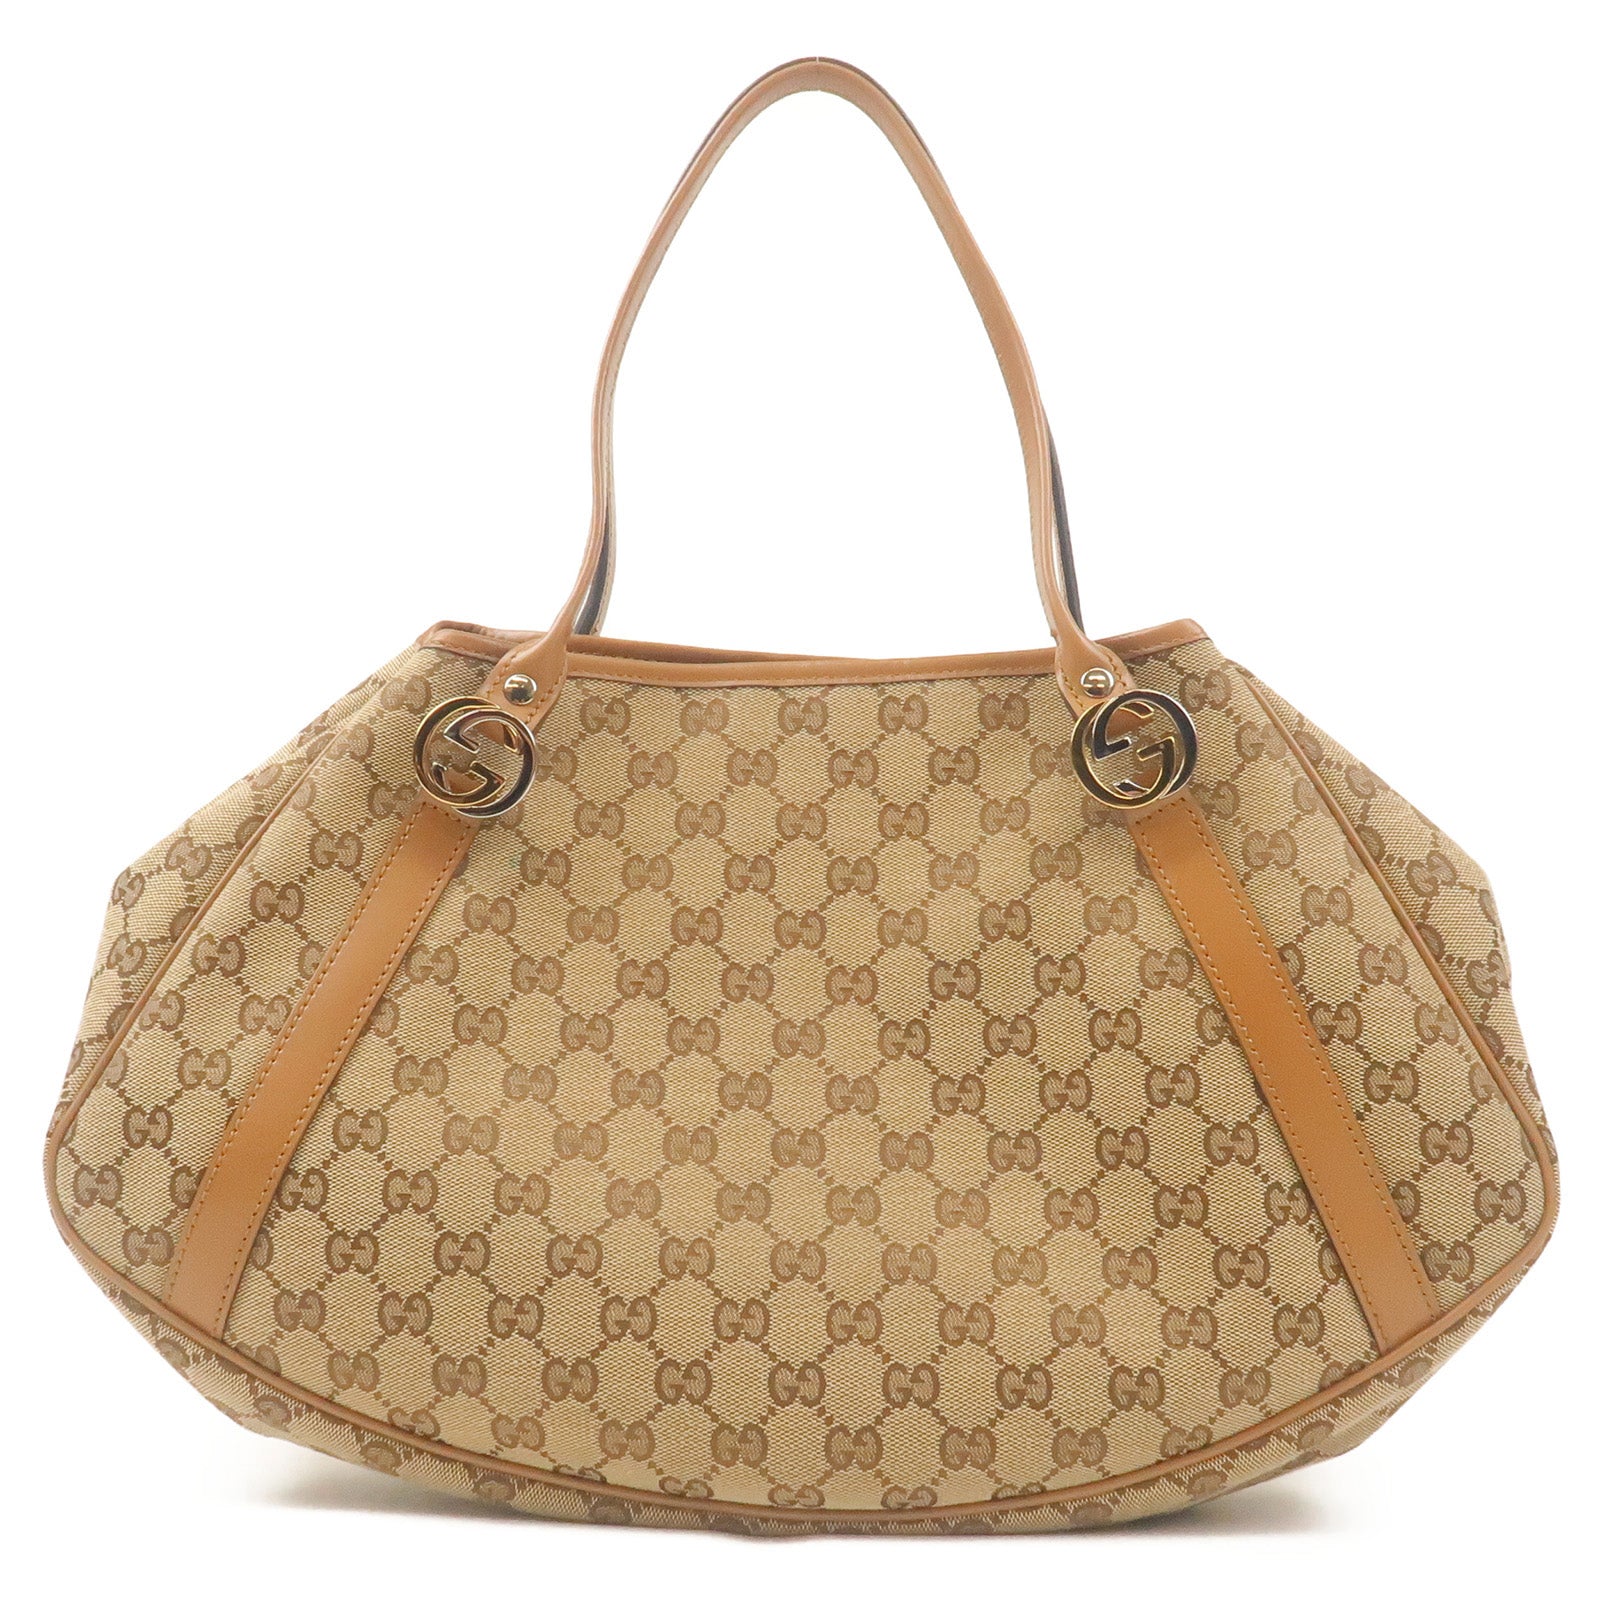 GUCCI-Twins-GG-Canvas-Leather-Tote-Bag-Beige-232963-F/S